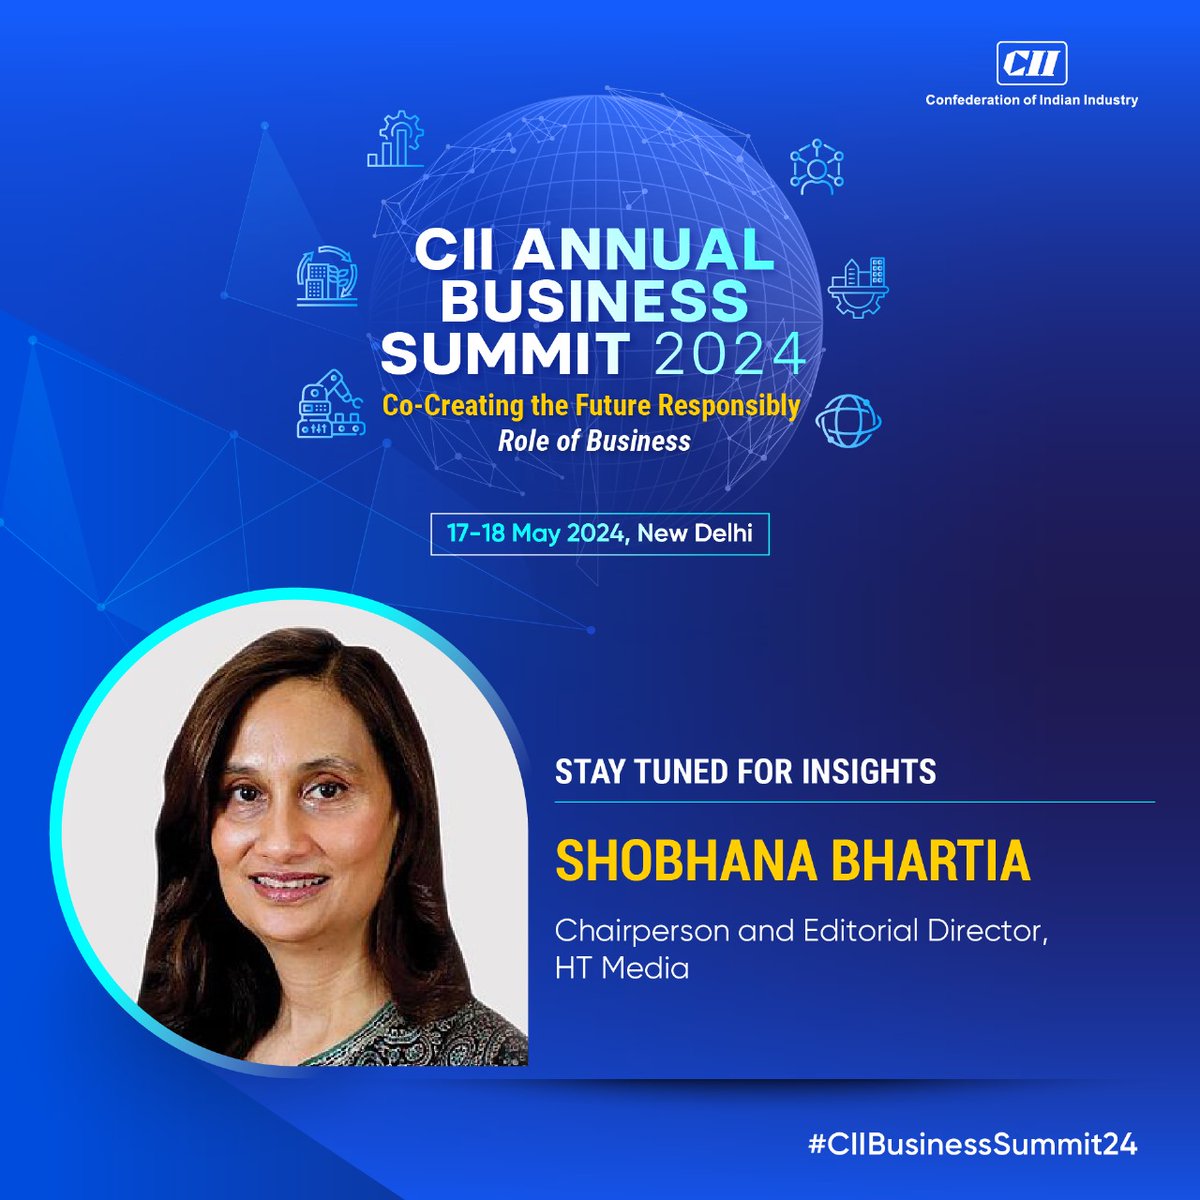 Shobhana Bhartia, Chairperson and Editorial Director, HT Media shares valuable thoughts at the CII Annual Business Summit 2024! Government dignitaries, entrepreneurs, influencers & thought leaders convene to share thoughts on the future of India as progresses towards economic